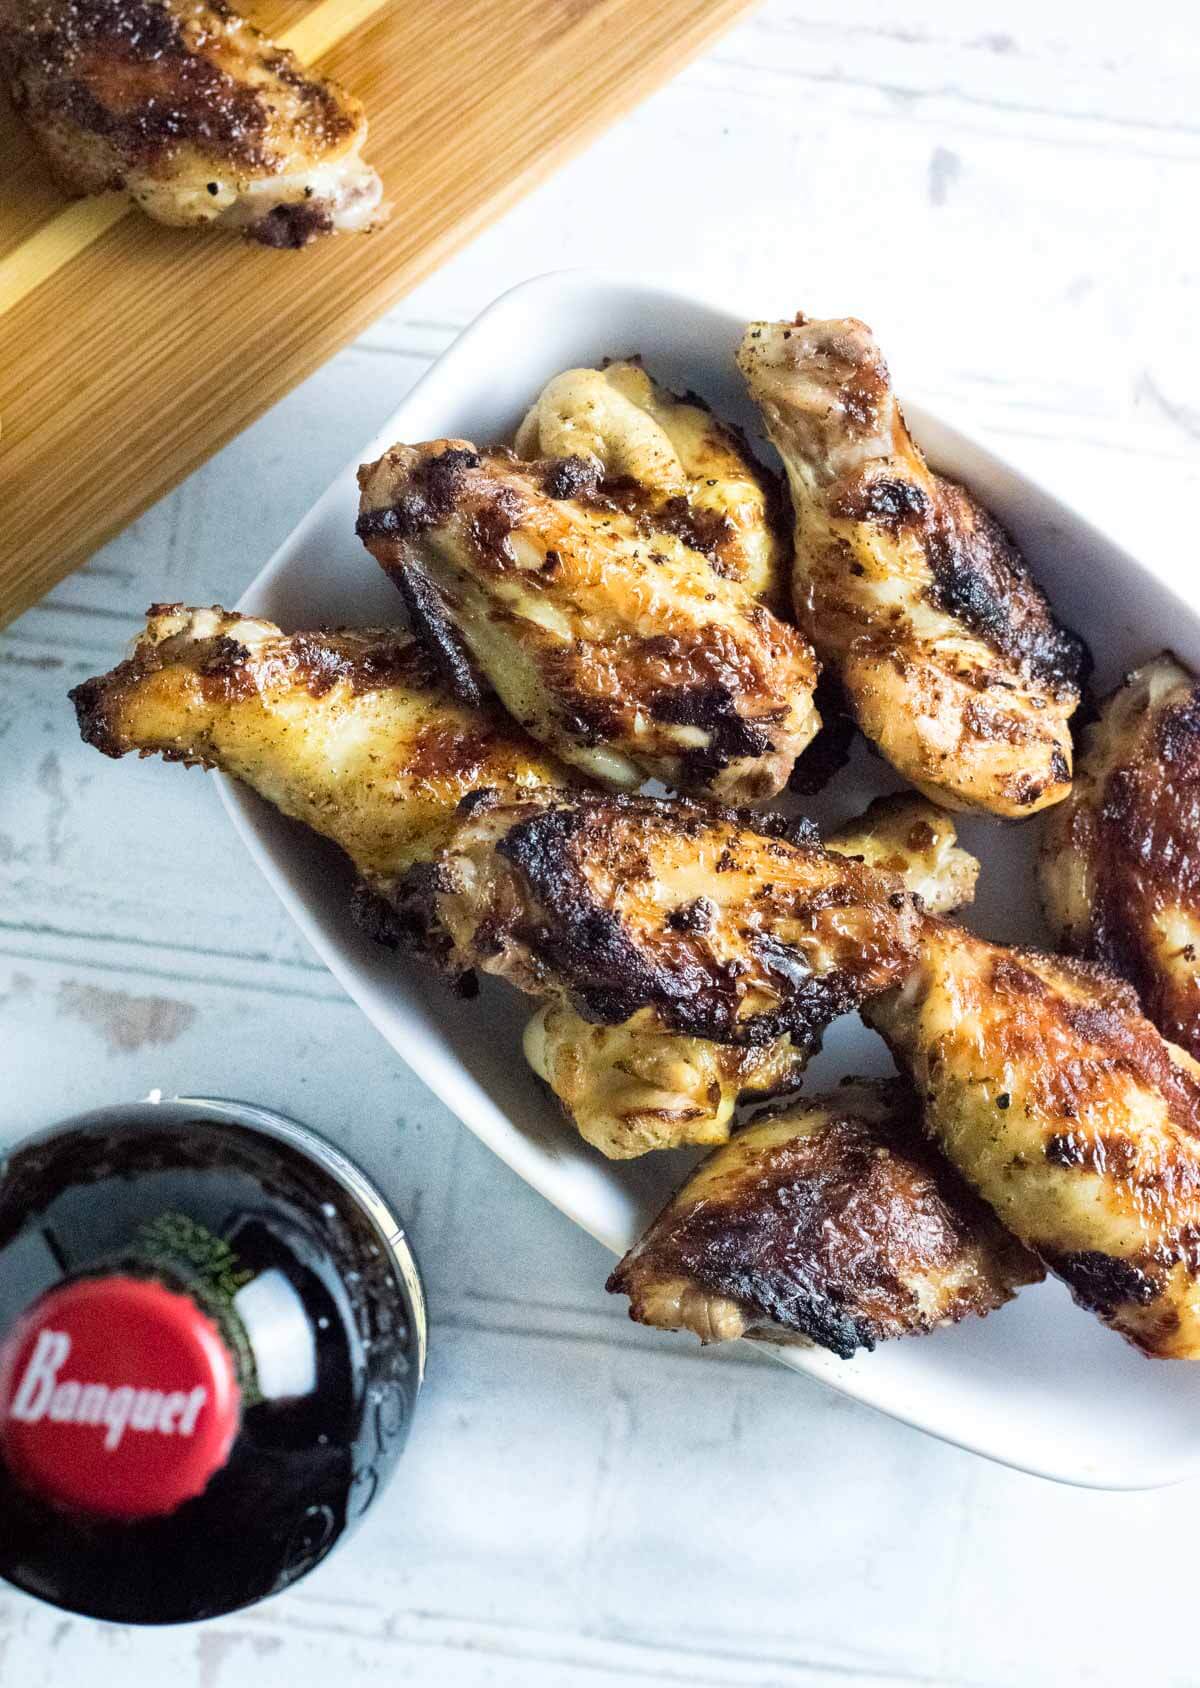 Brined chicken wings grilled and served.